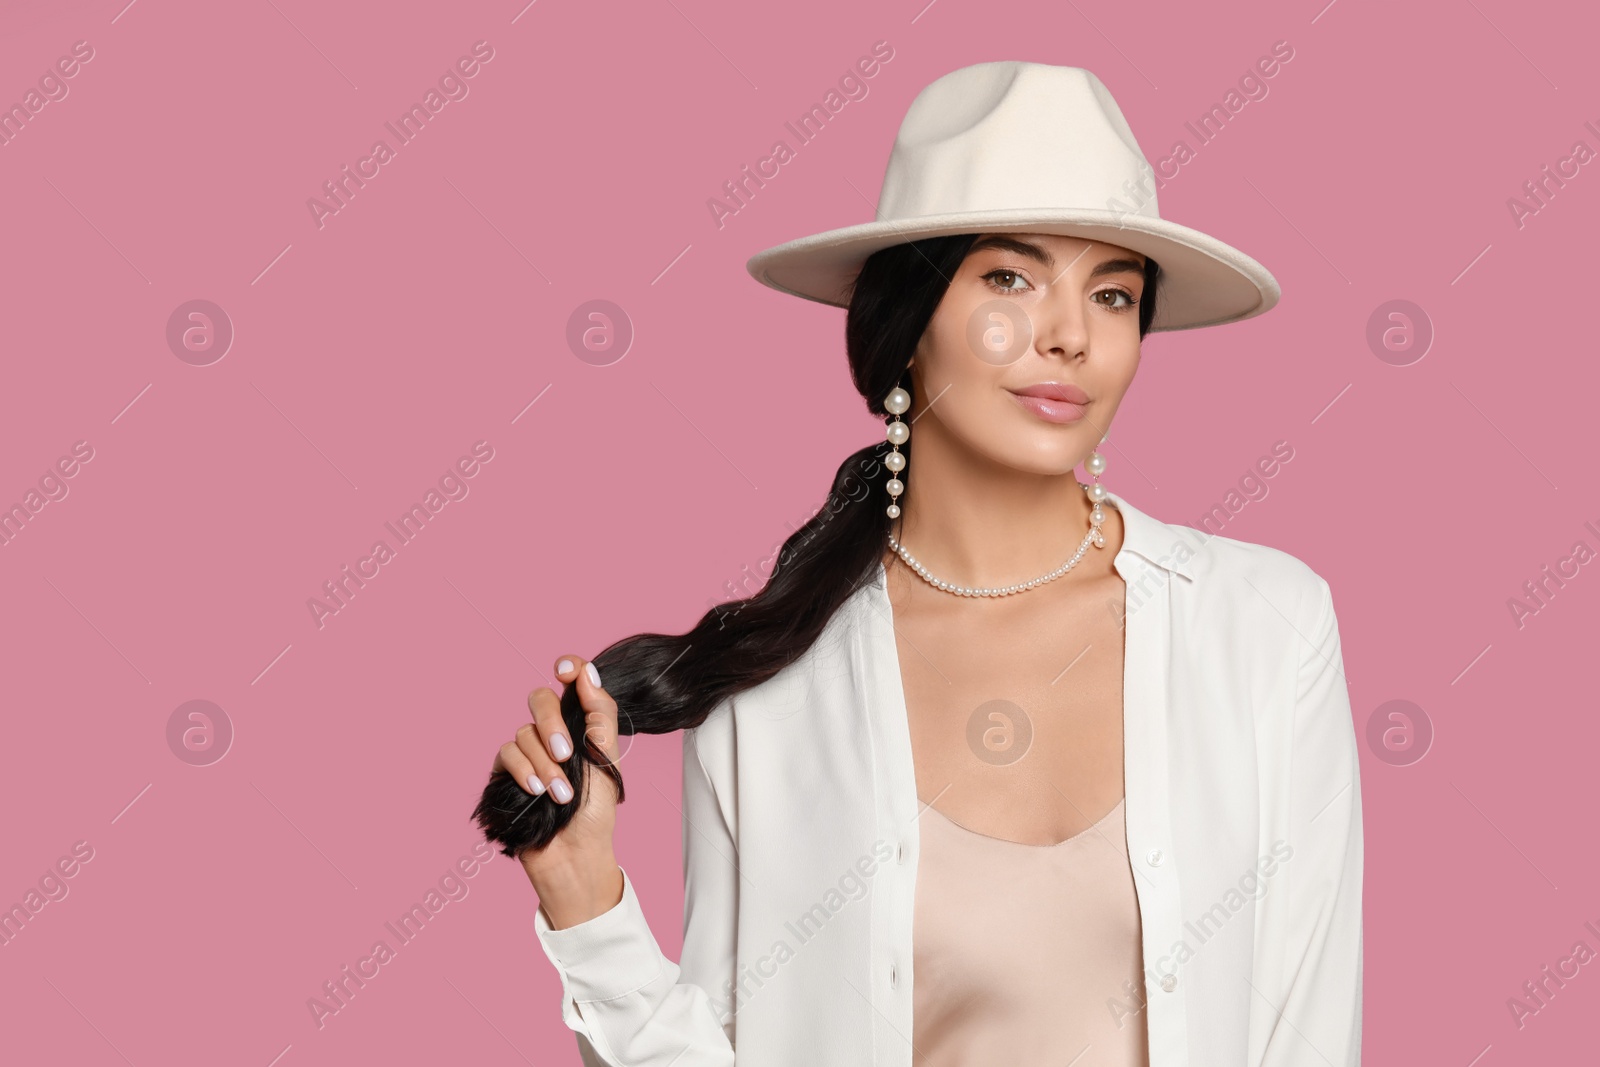 Photo of Young woman wearing elegant pearl jewelry on pink background, space for text